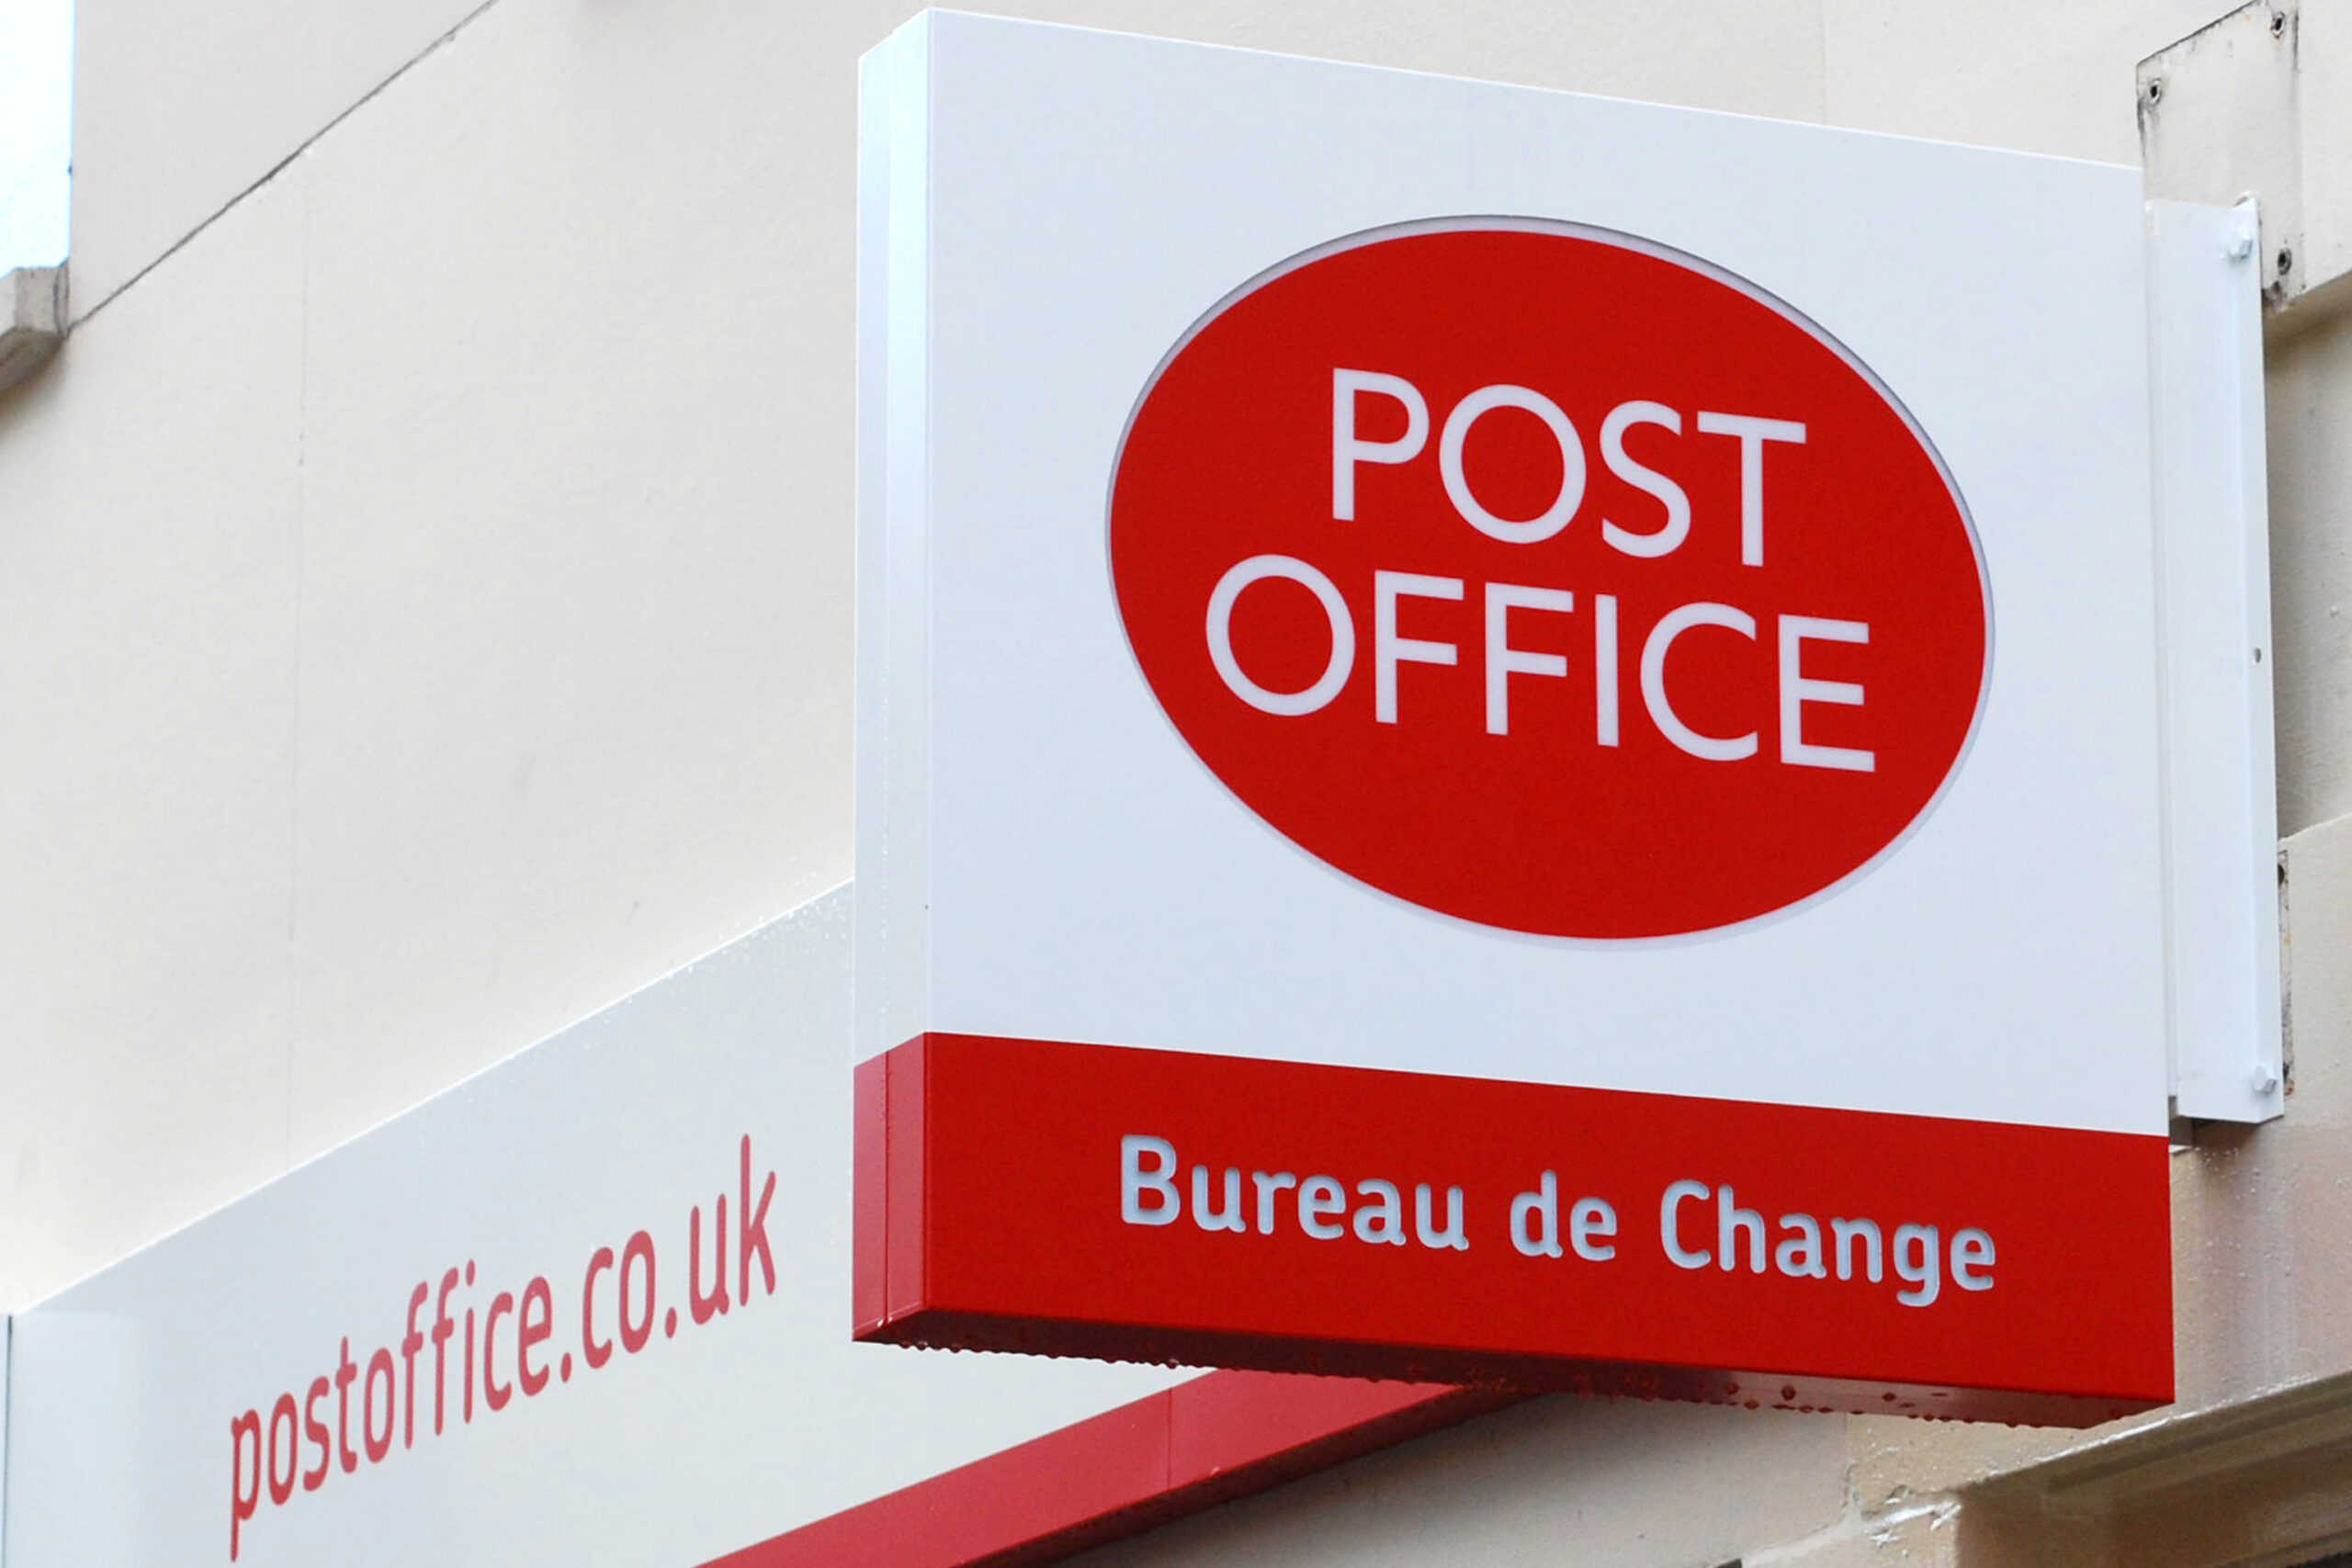 Leaked recording shows Post Office execs insulting subpostmasters